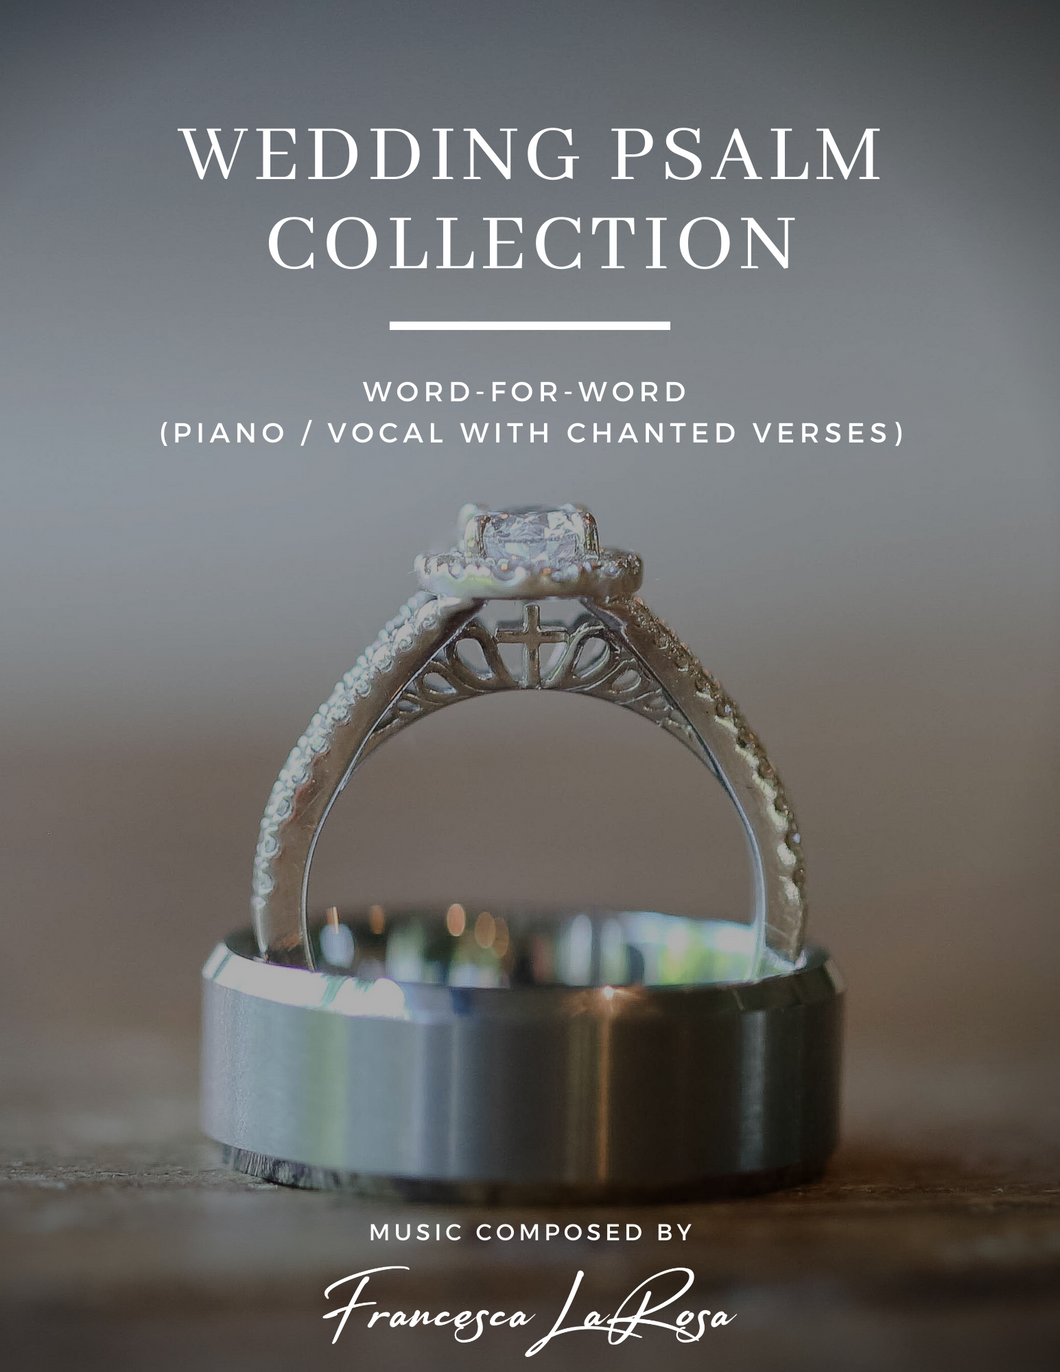 The Complete Wedding Psalm Collection (Piano / Vocal Chanted Verses)